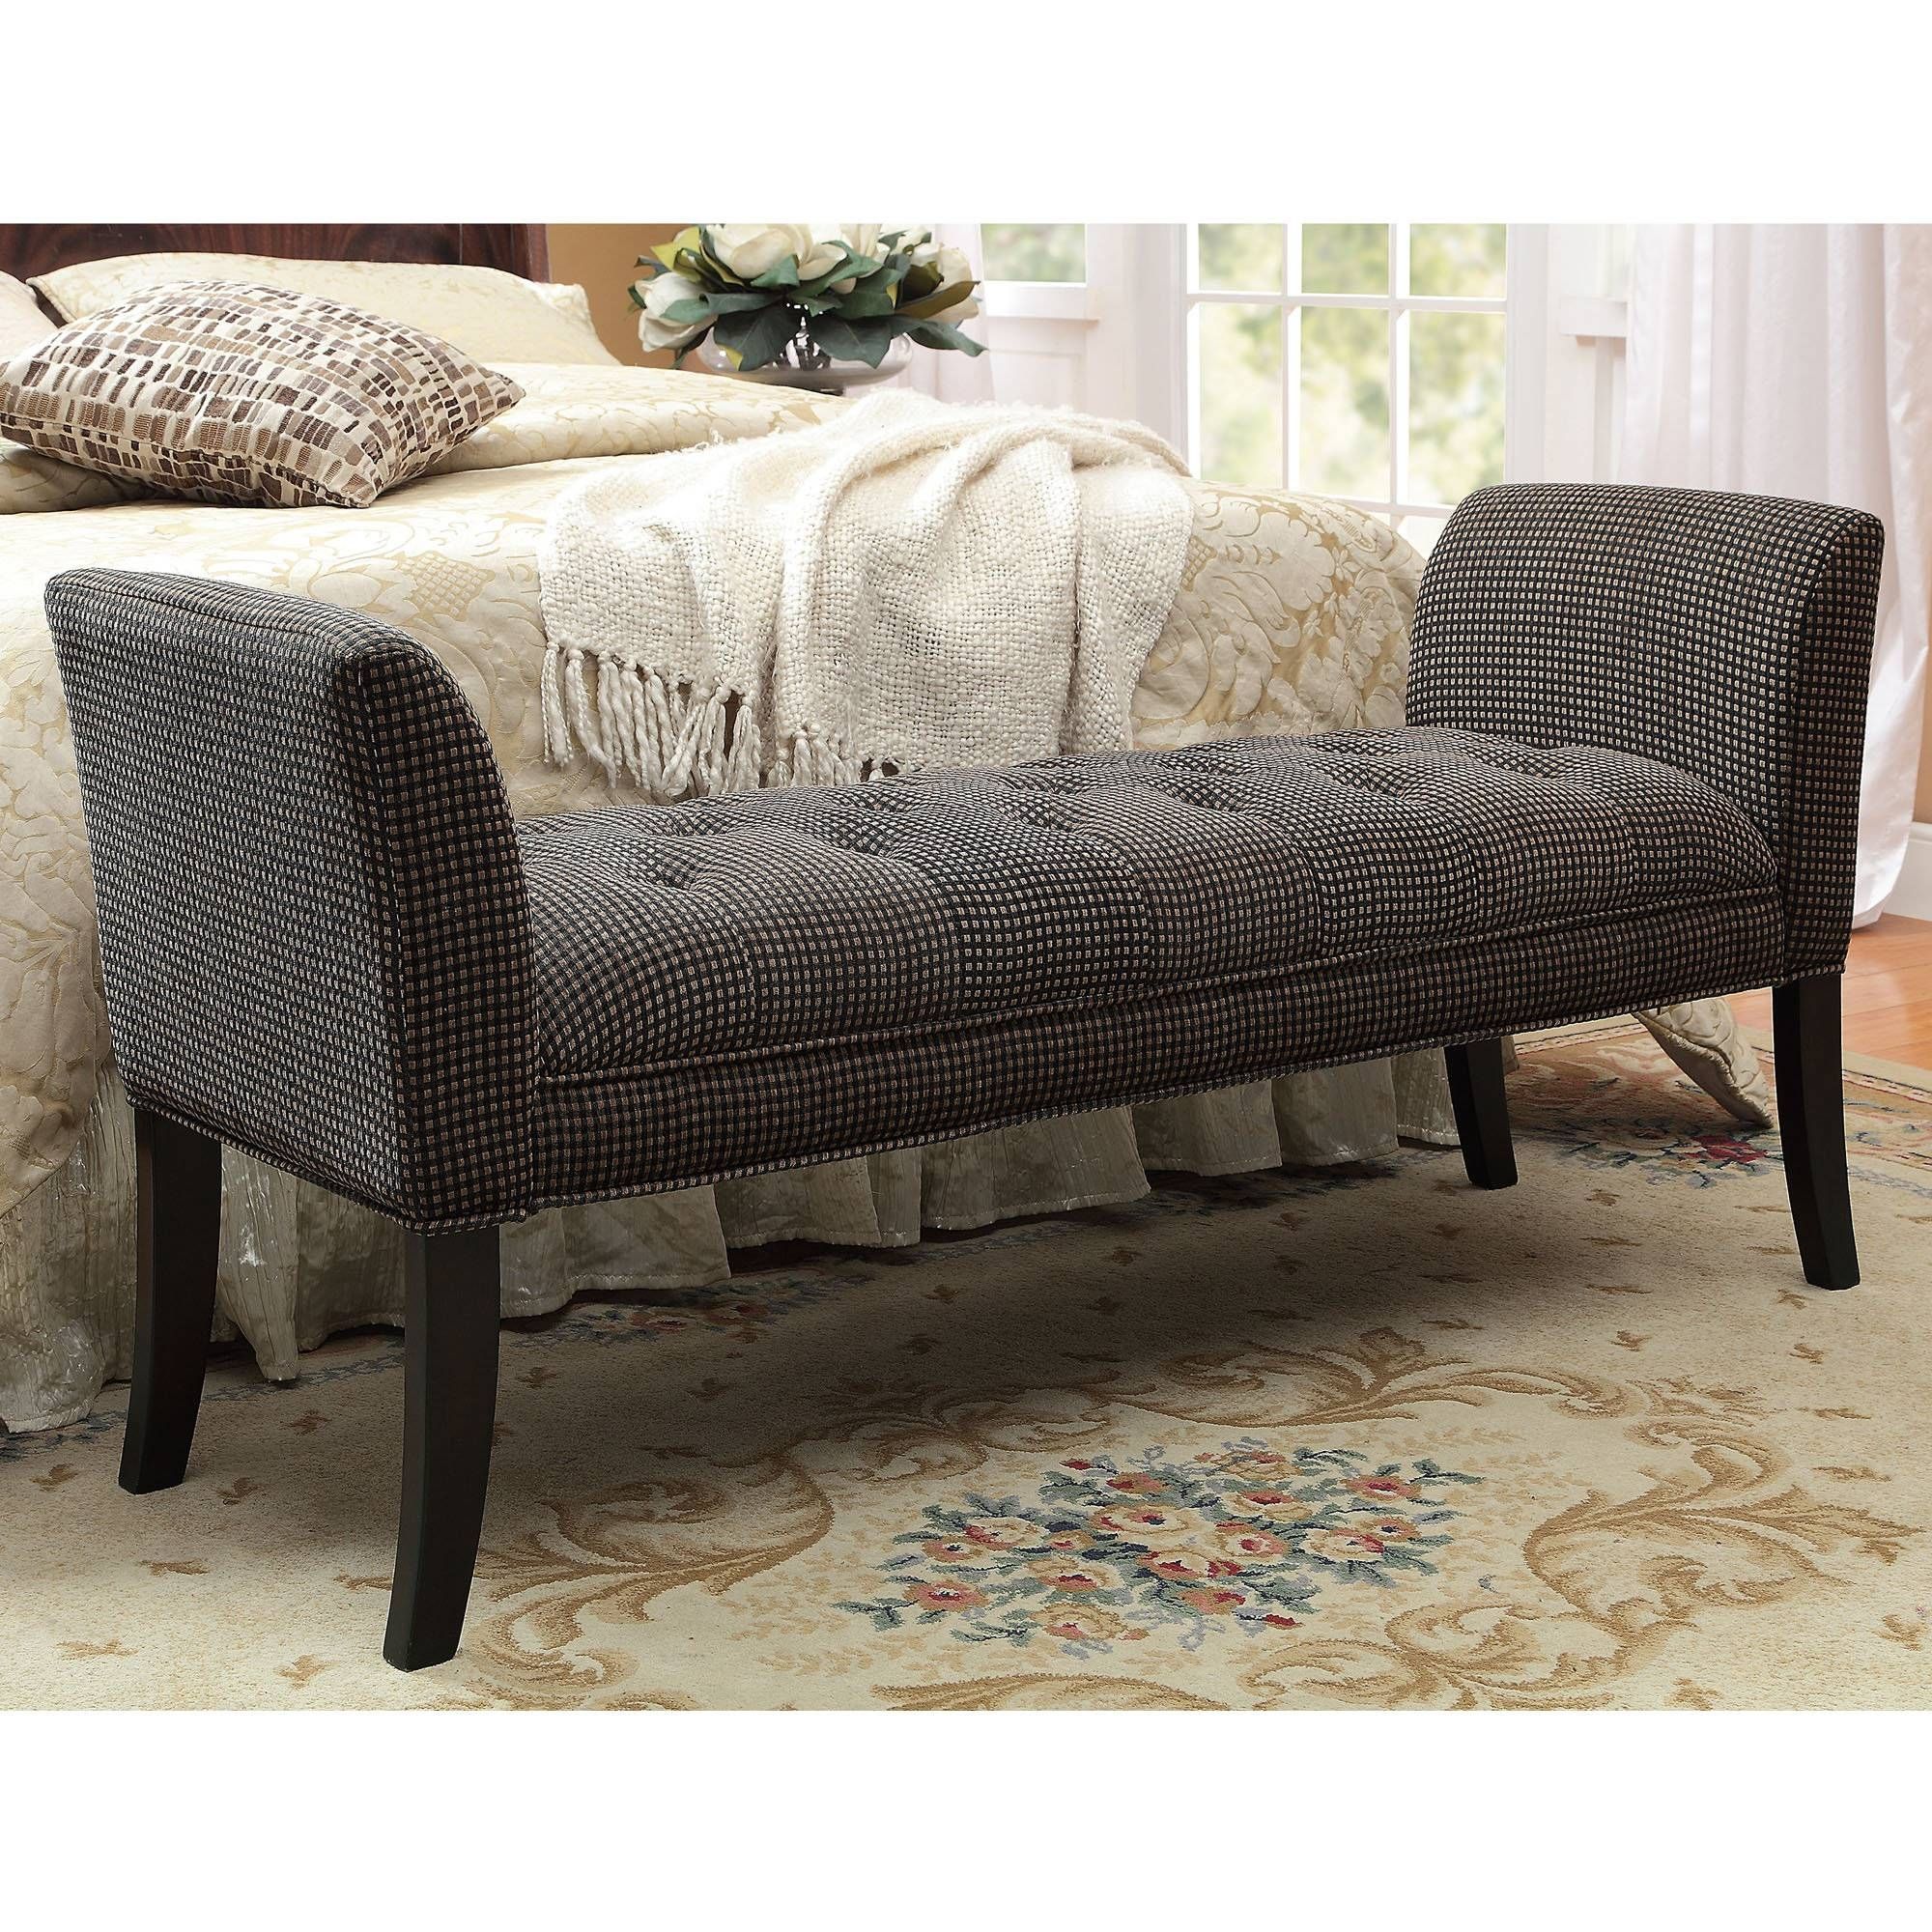 Furniture: Settee Bench: Antique To Modern — Blueribbonbeerrun For Bedroom Bench Sofas (View 6 of 15)